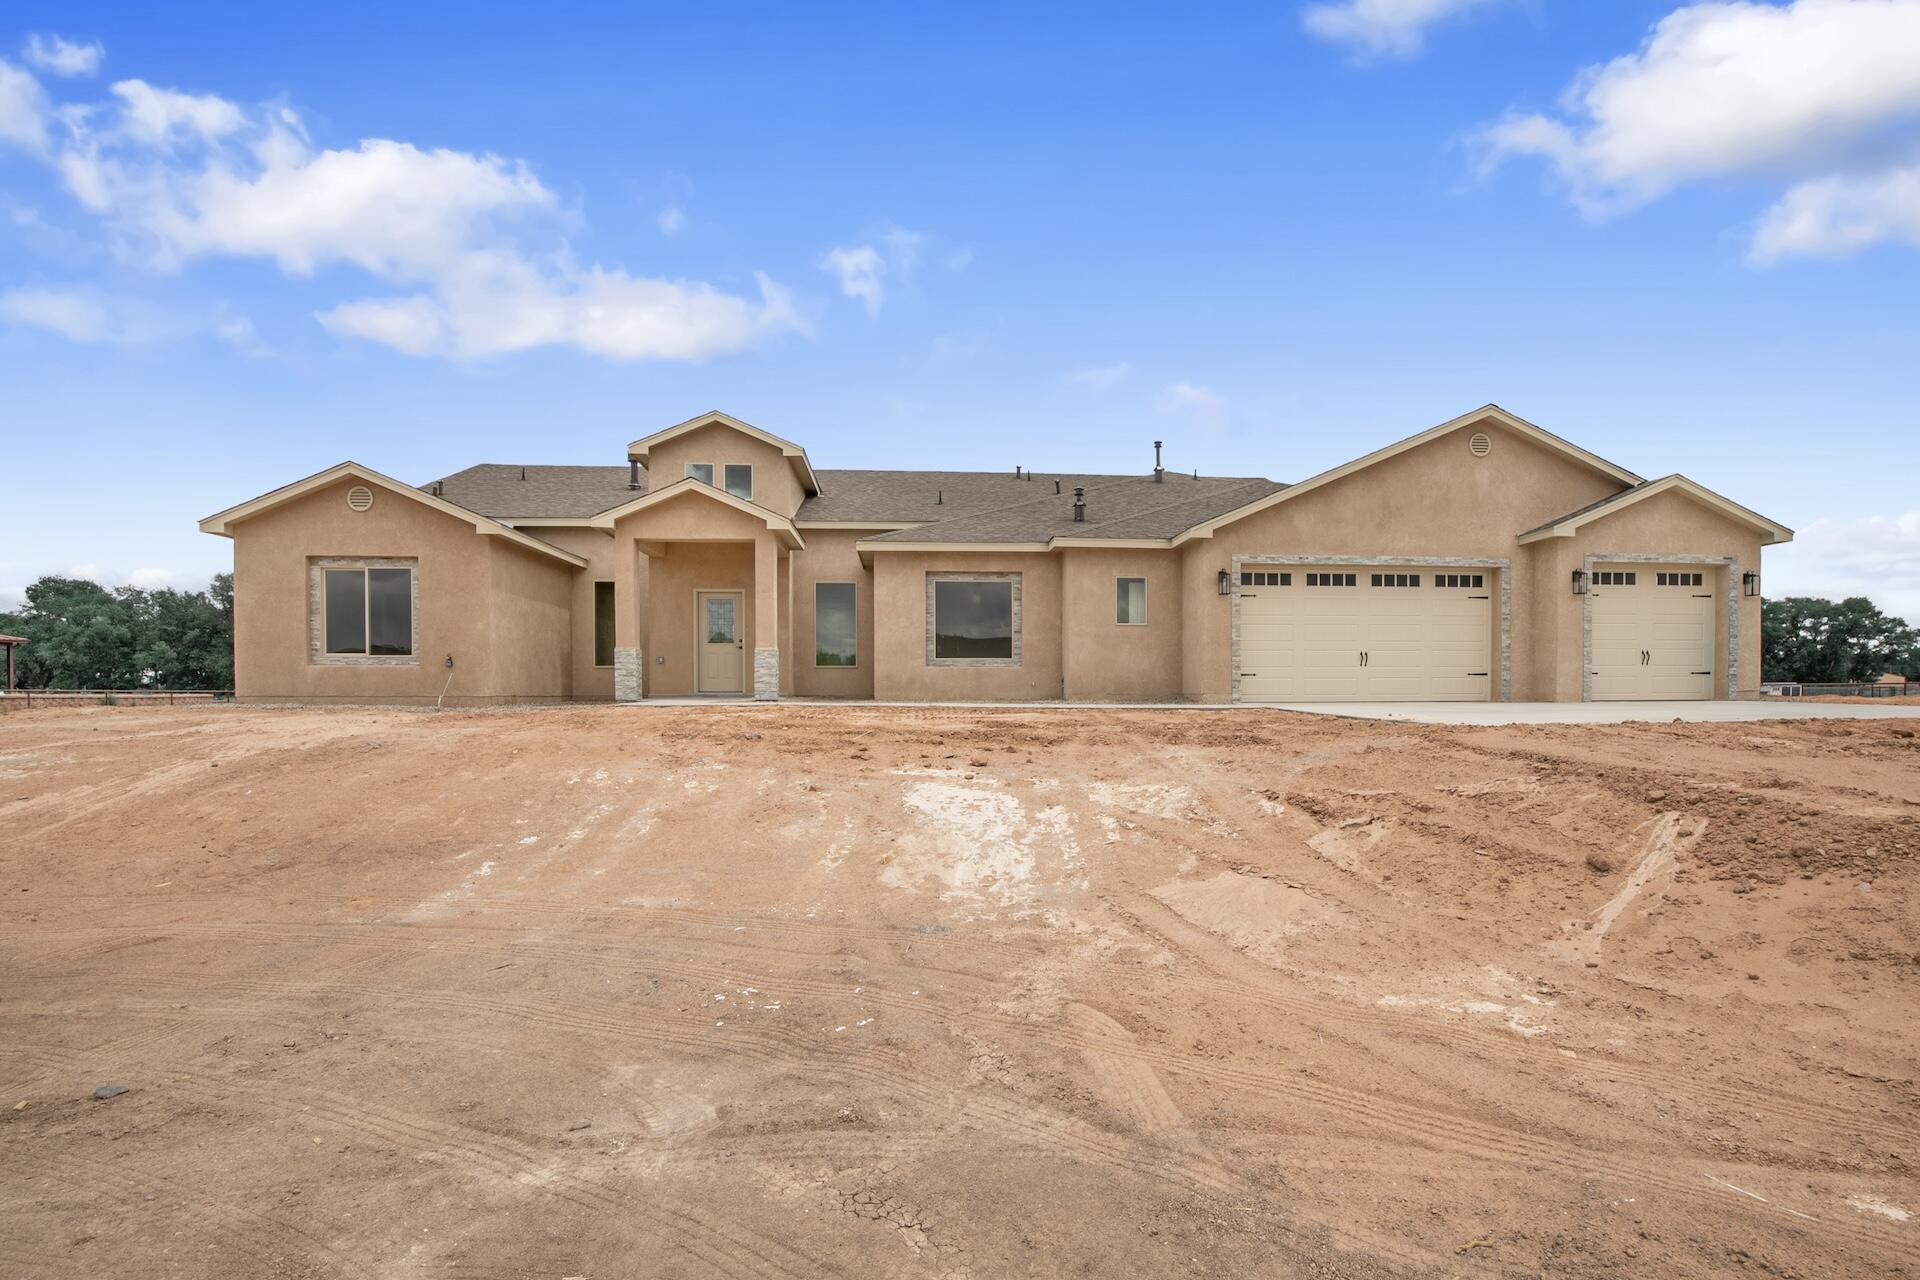 What a wonderful opportunity to purchase this newly completed home situated on 2 acres in a desirable area of Valencia County! With custom features throughout, this home will surely exceed your expectations. Custom cabinetry, granite countertops, tile backsplash, flooring and shower surrounds. The floor plan is open, spacious and perfect for entertaining.